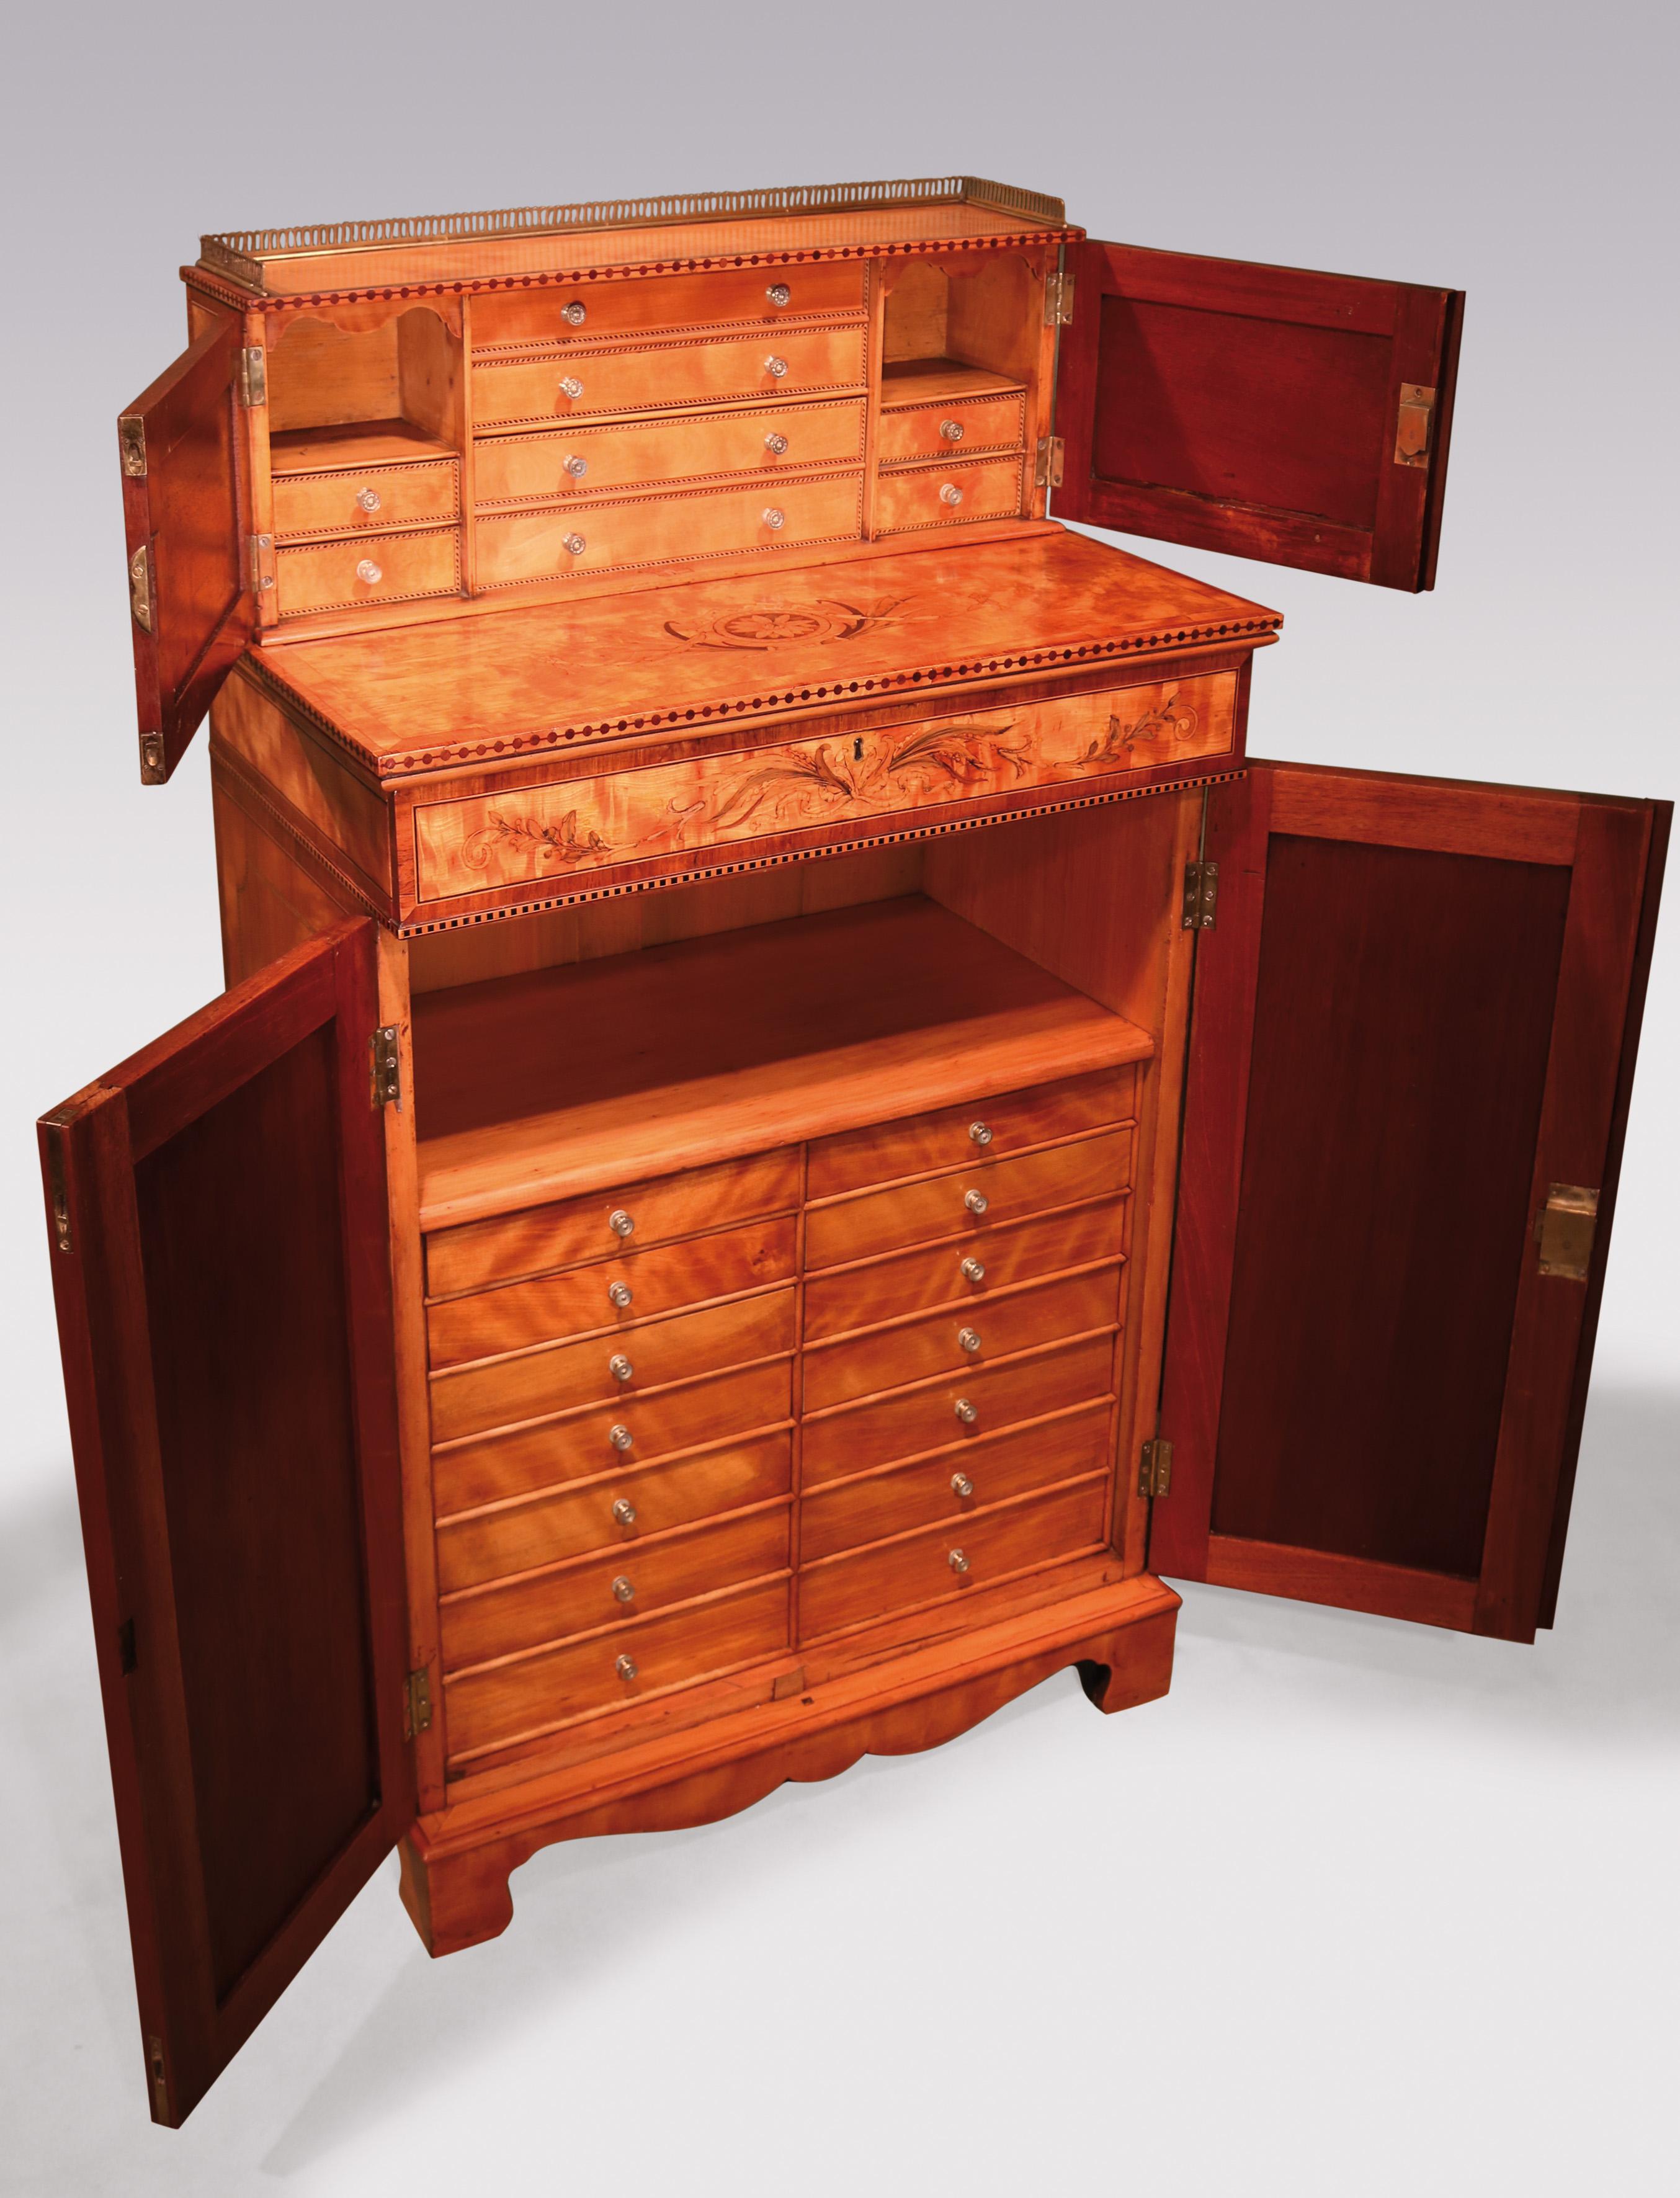 A rare late 18th century satinwood collector’s cabinet in the manner of Mayhew and Ince, tulipwood crossbanded throughout, the doors enclosing various small drawers inlaid with oval panels, swags & honeysuckle decoration. In the cupboard below there